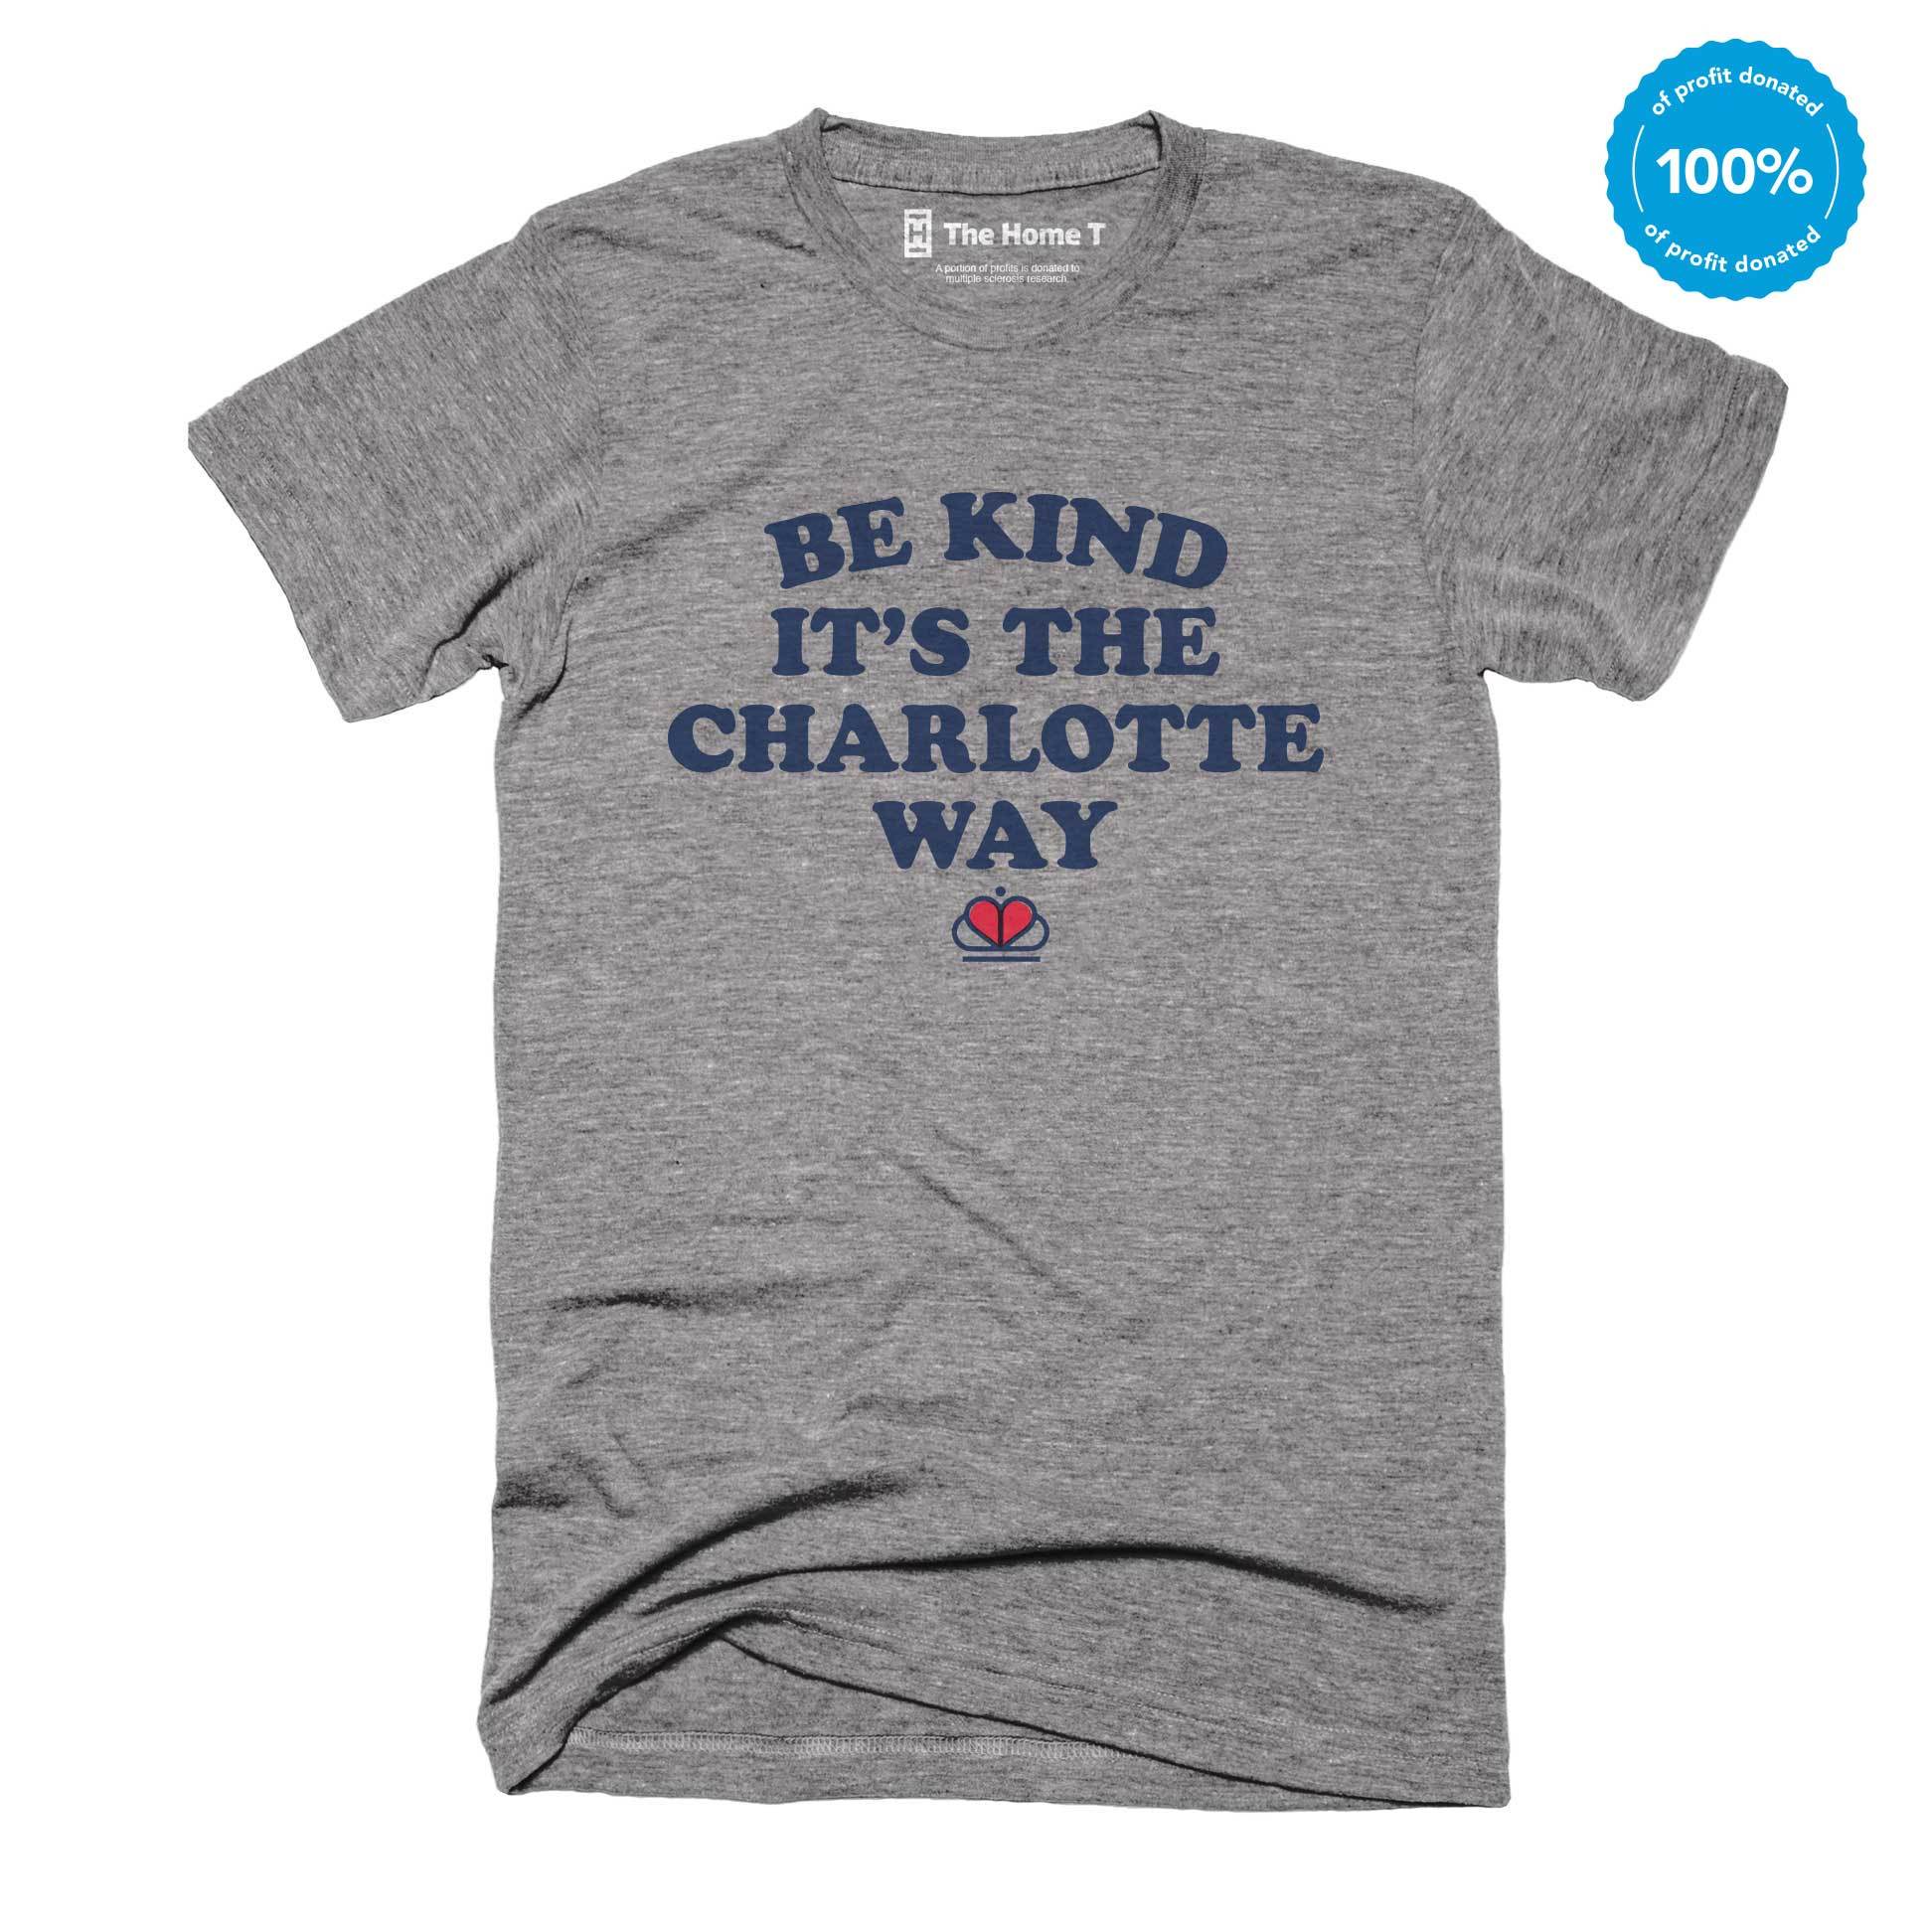 Be Kind It's The Charlotte Way (Fundraiser)